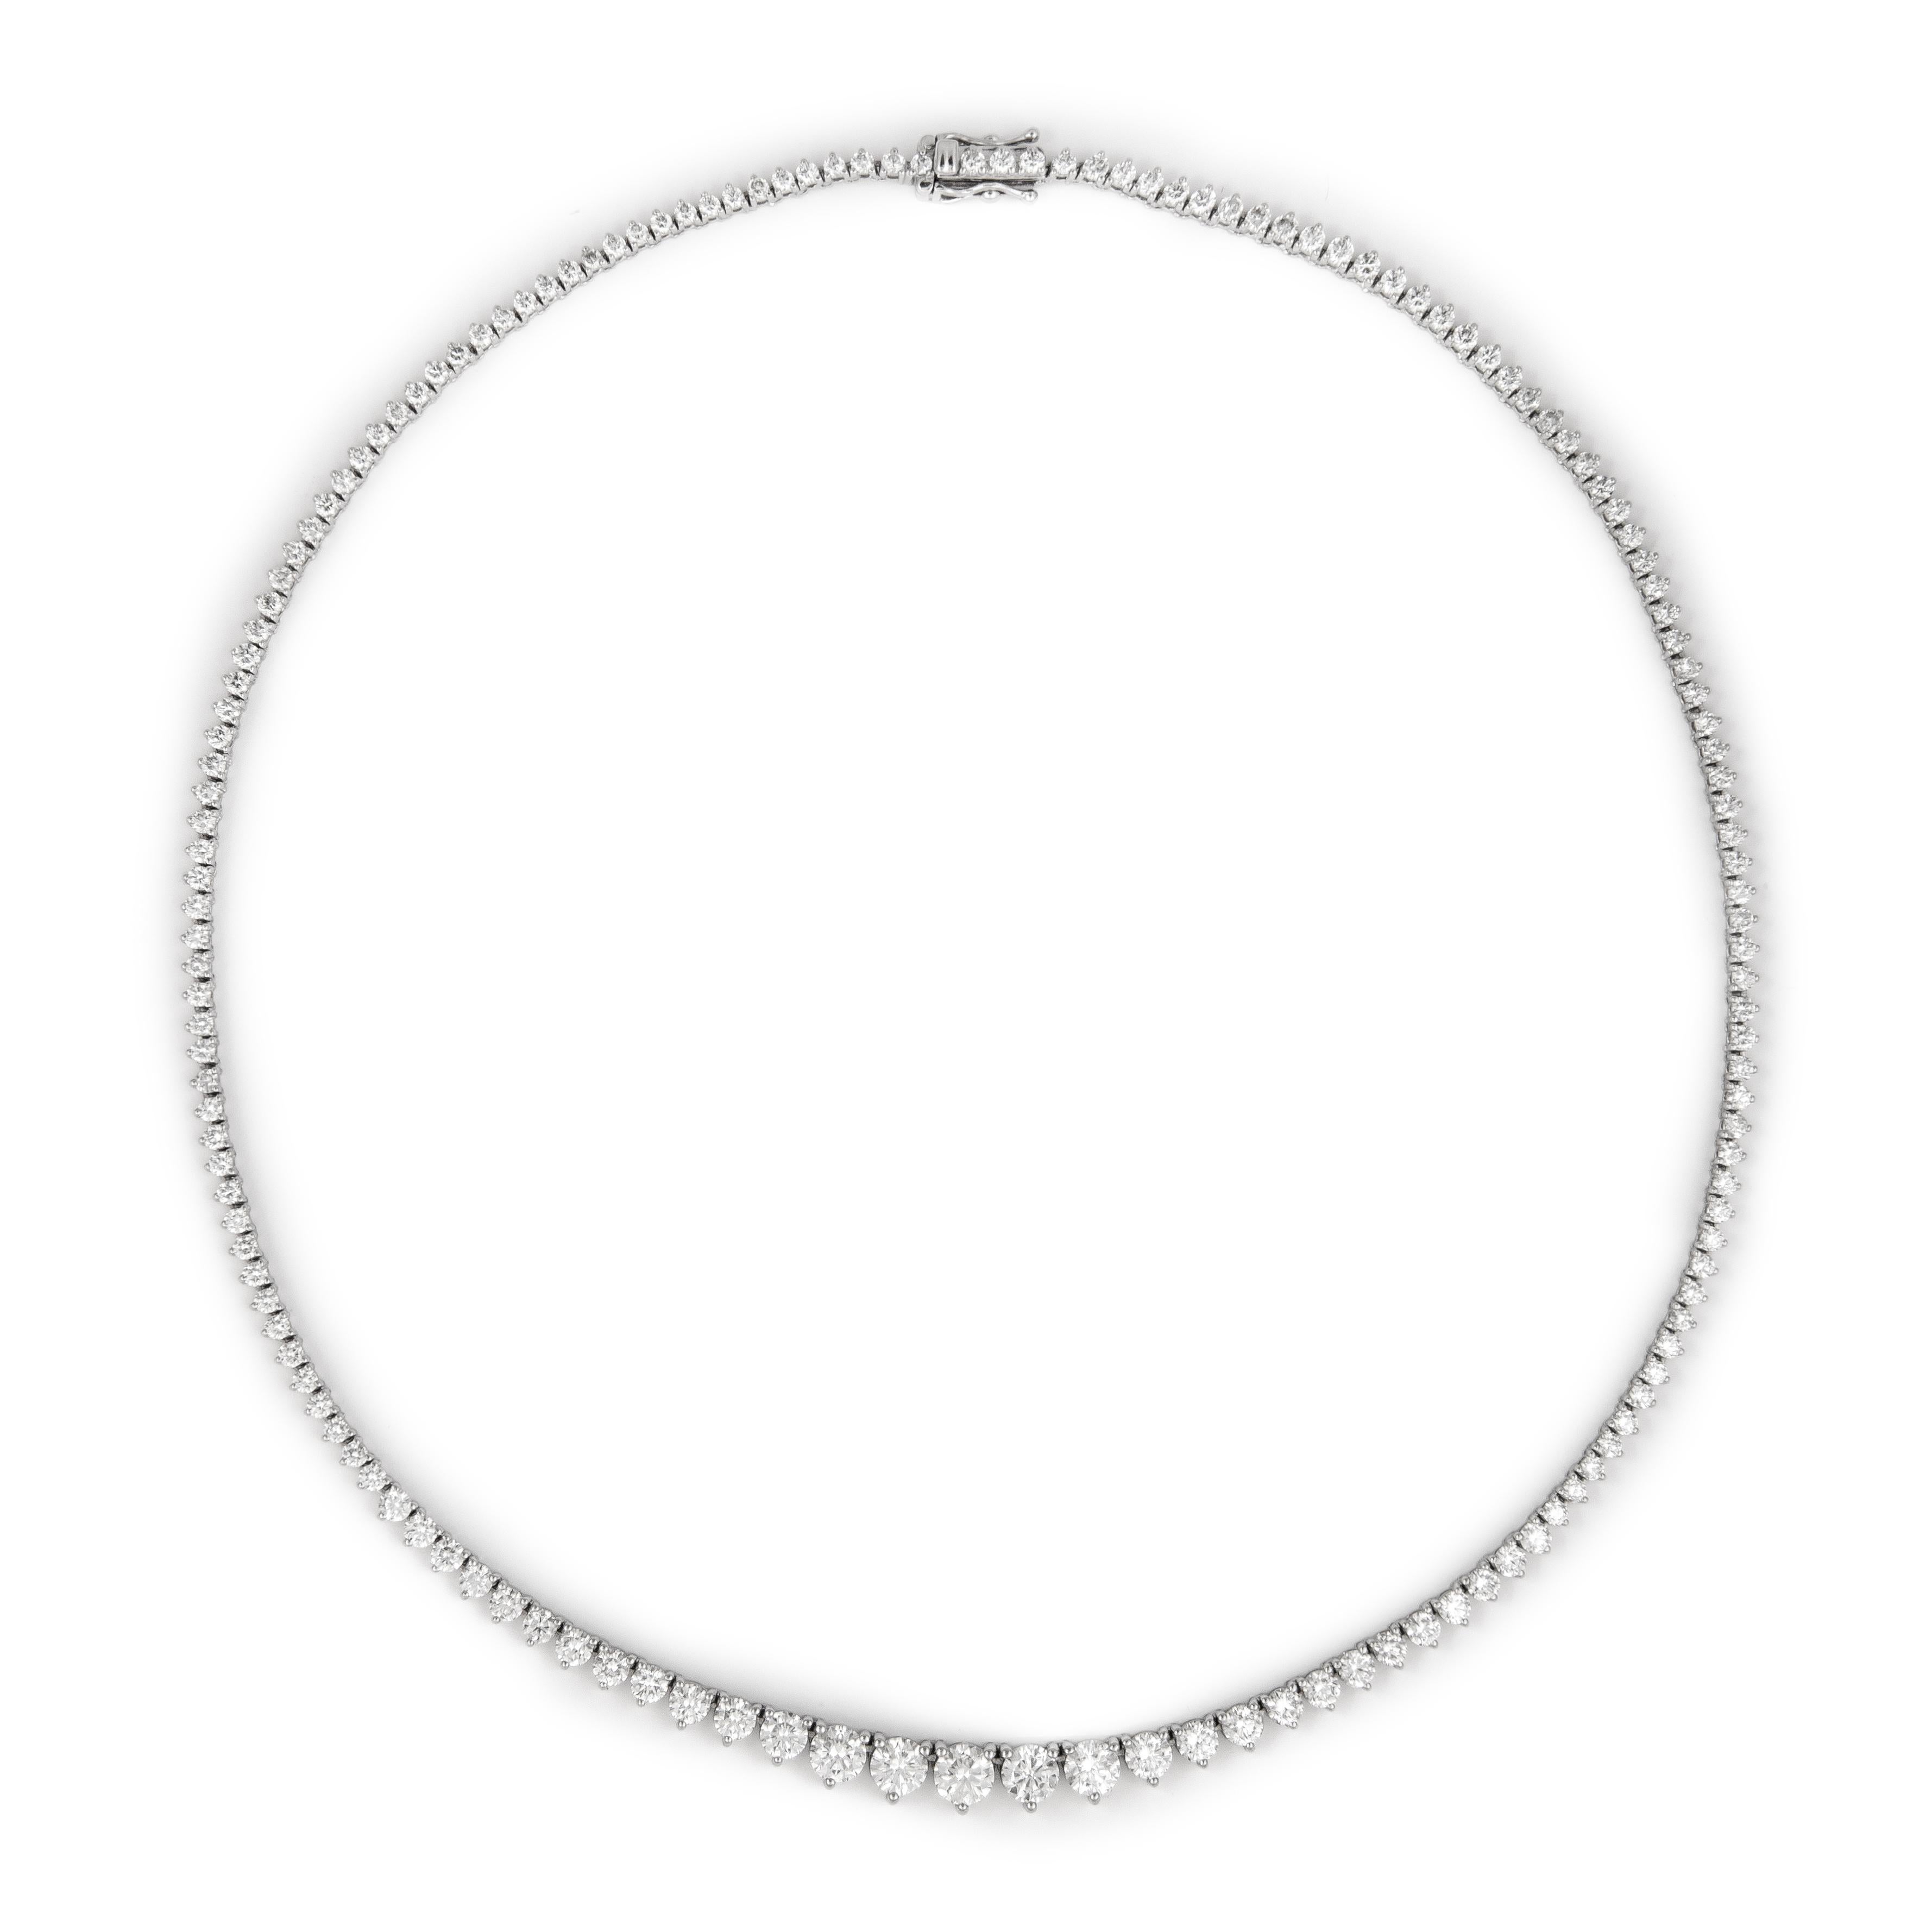 Beautiful and classic diamond tennis riviera necklace, by Alexander Beverly Hills.
9.26 carats of round brilliant diamonds, approximately I/J color and SI clarity. Three prong, 18k white gold, 18.90 grams, 16.5In.
Accommodated with an up-to-date